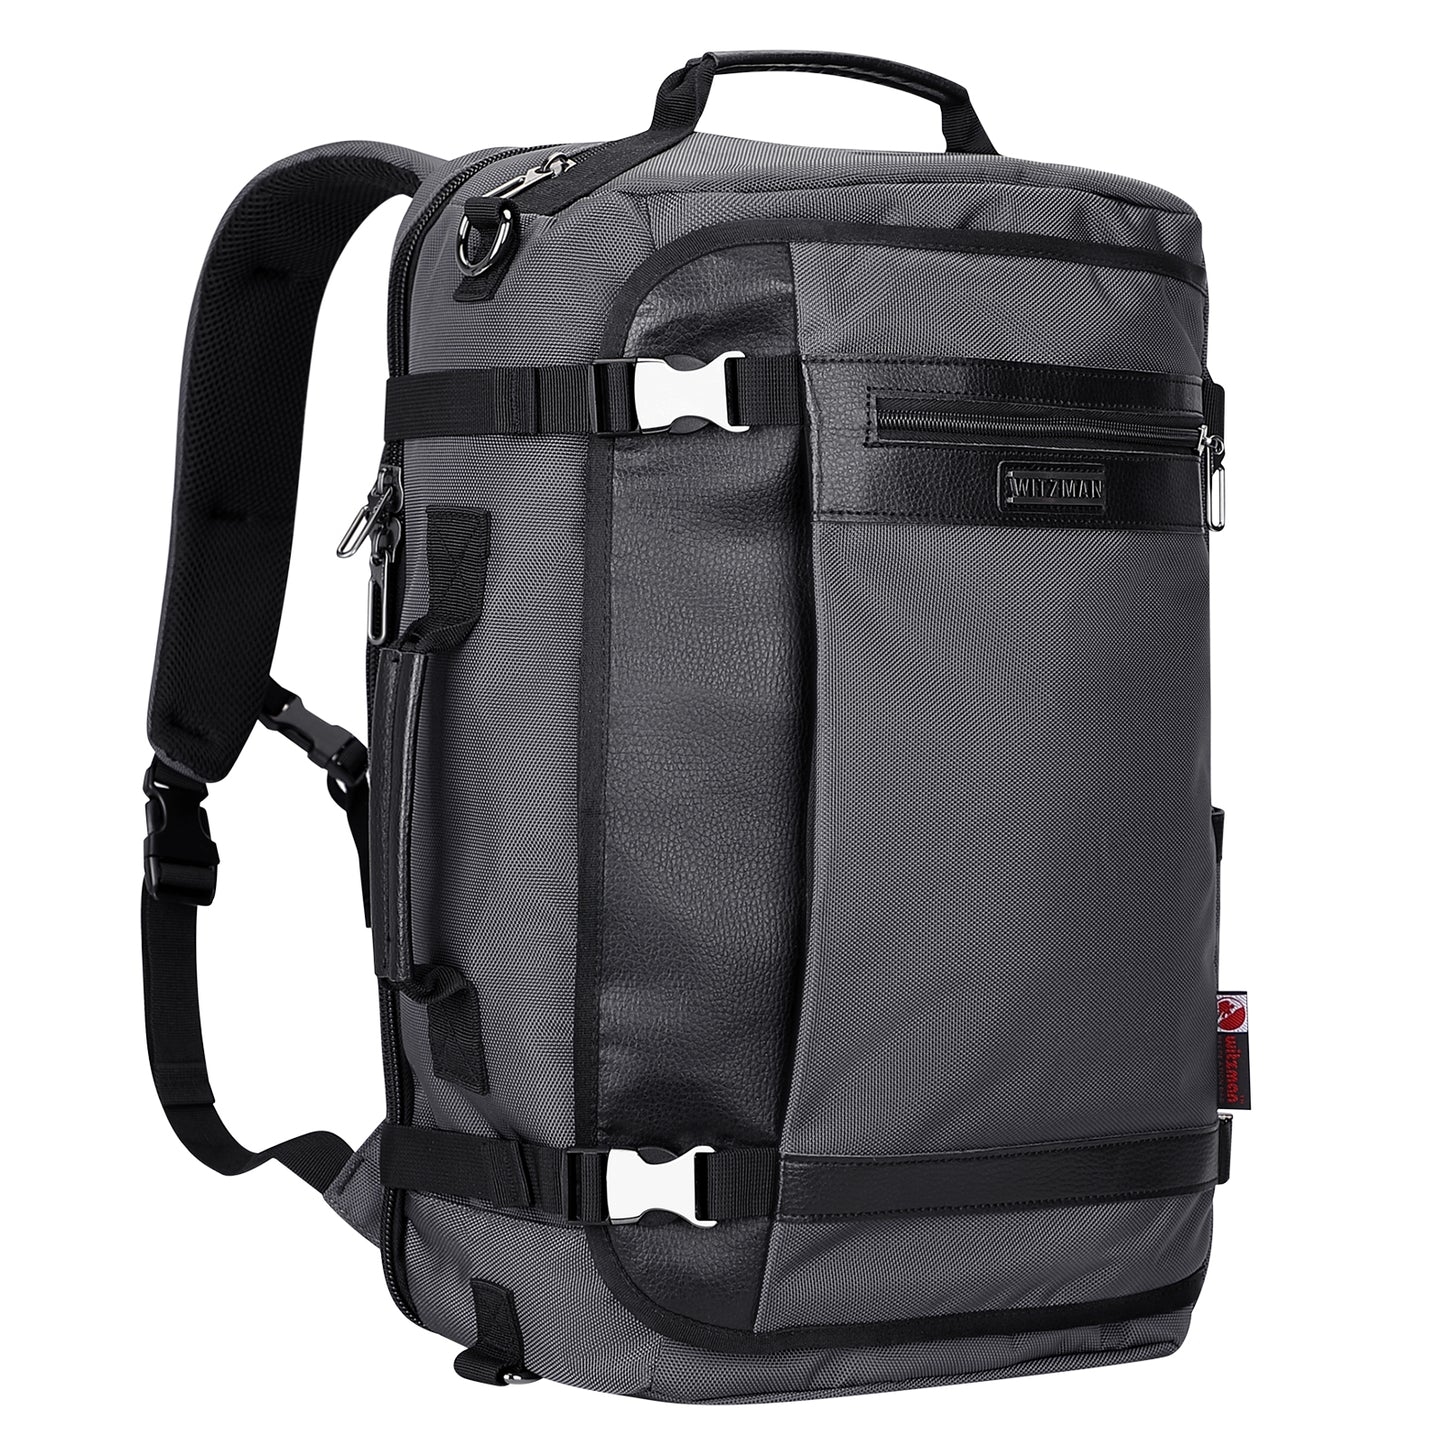 WITZMAN Carry On Travel Backpack